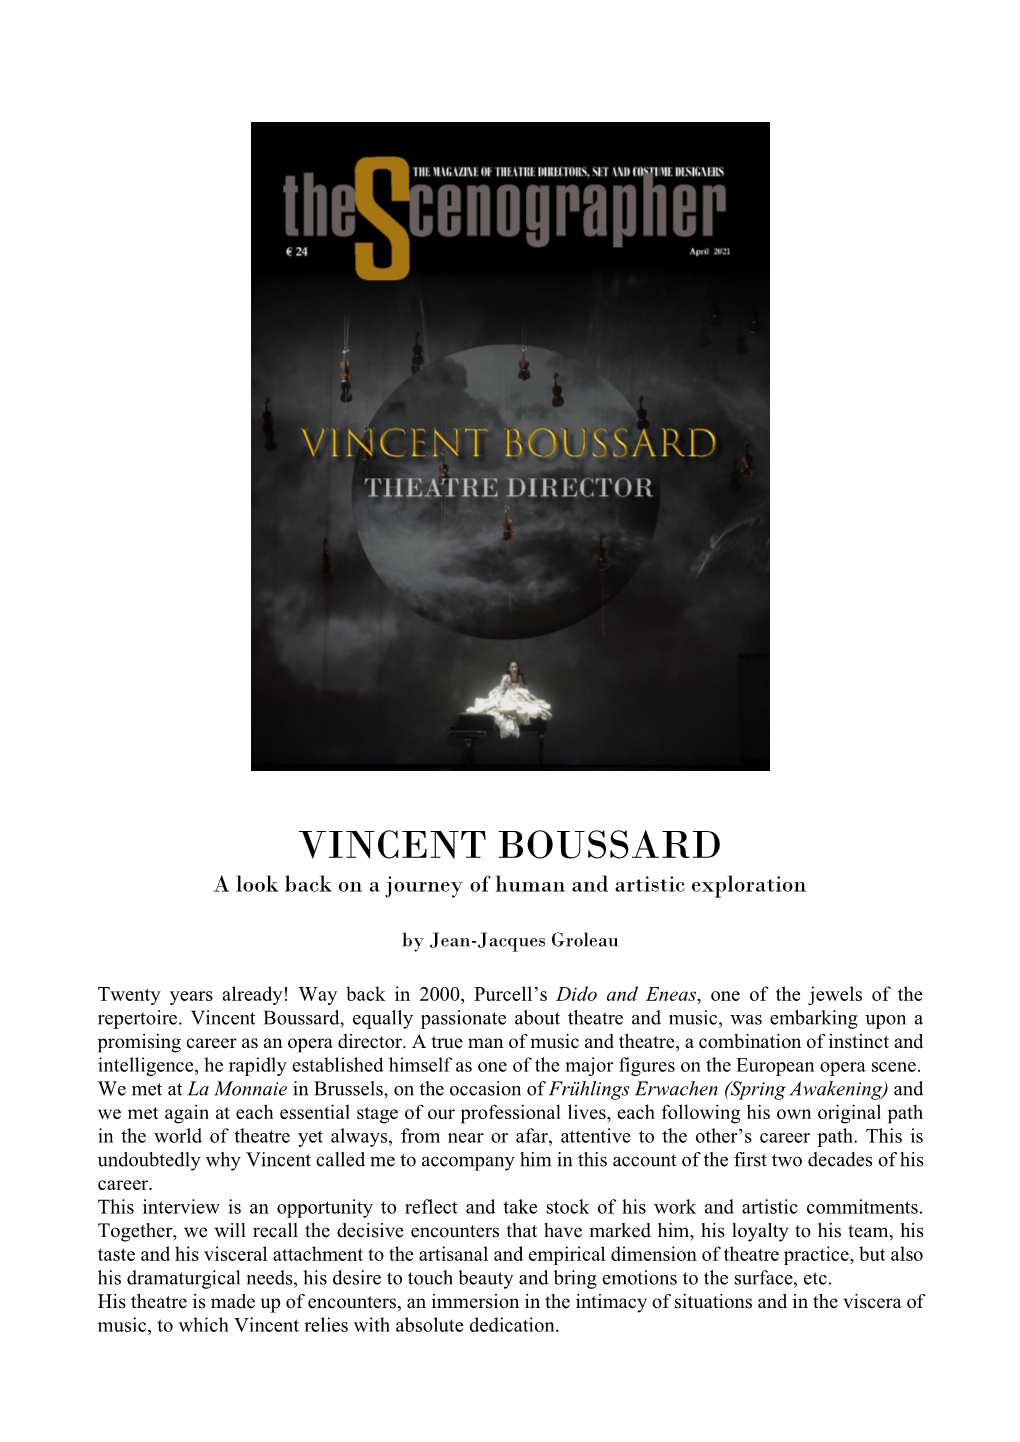 VINCENT BOUSSARD a Look Back on a Journey of Human and Artistic Exploration